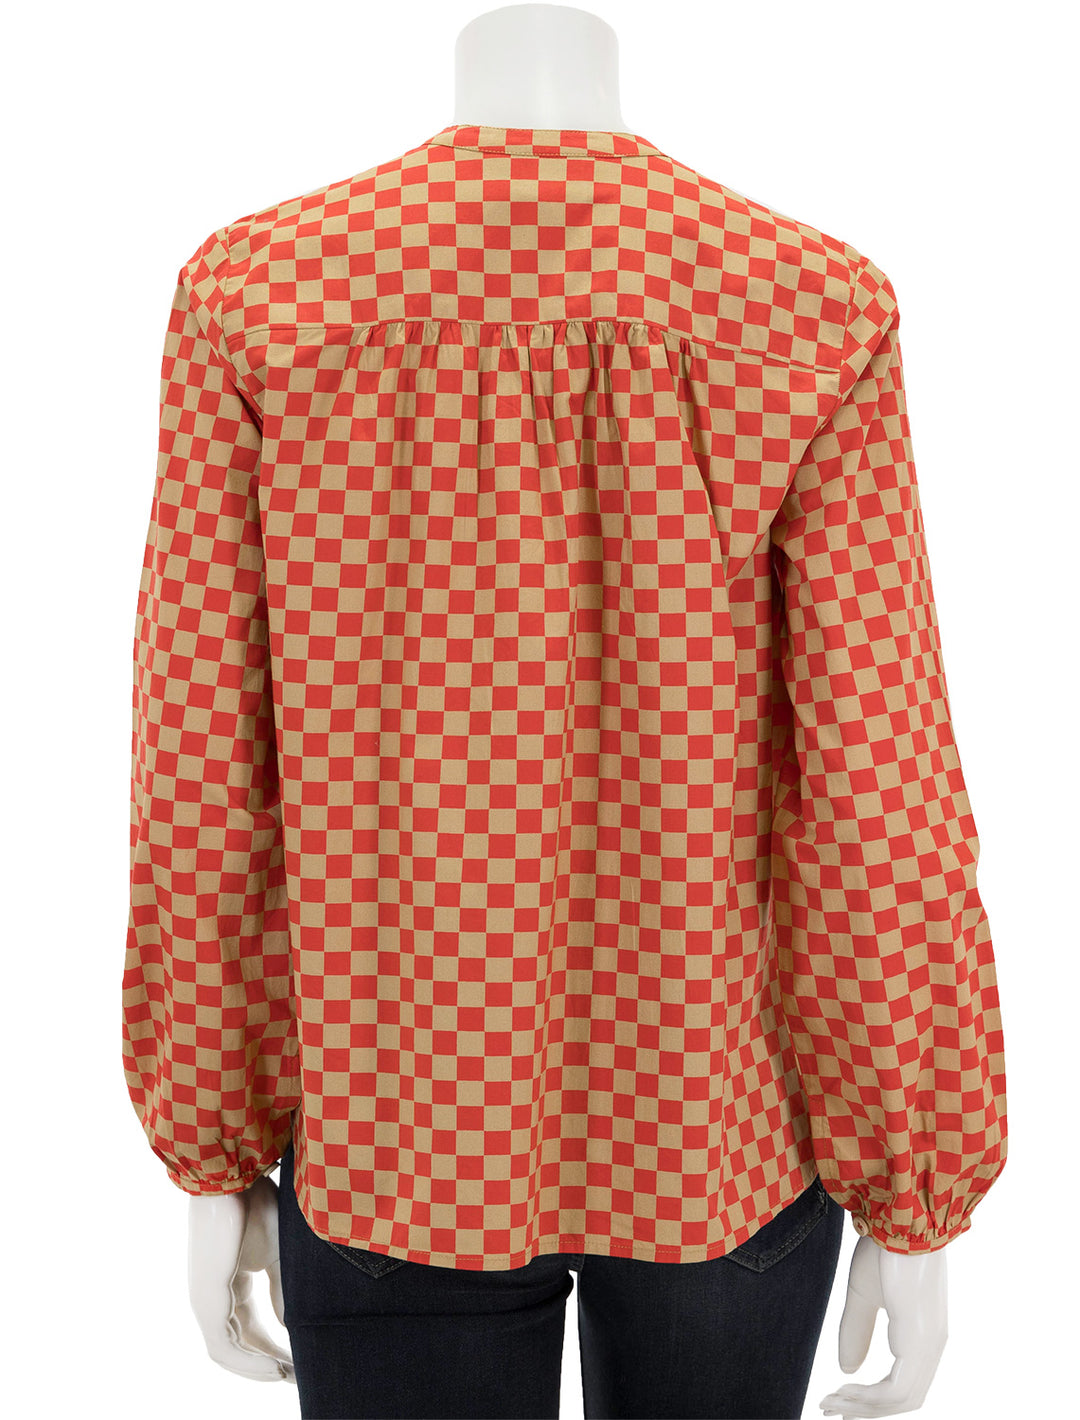 Back view of Clare V.'s st. martin top in poppy and khaki checker.